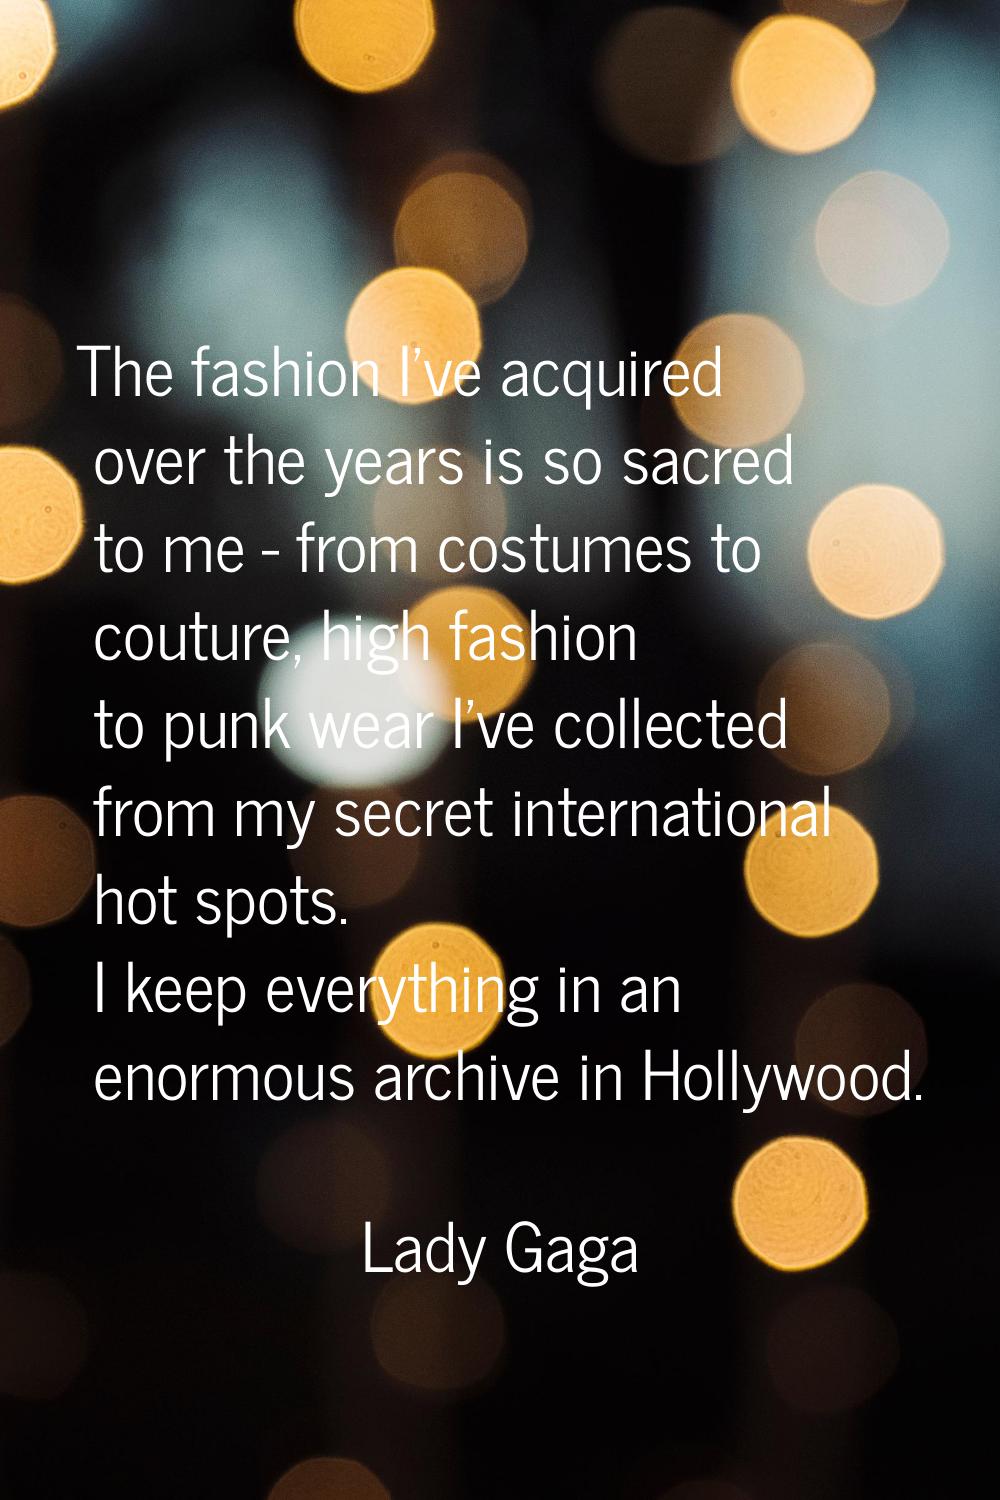 The fashion I've acquired over the years is so sacred to me - from costumes to couture, high fashio